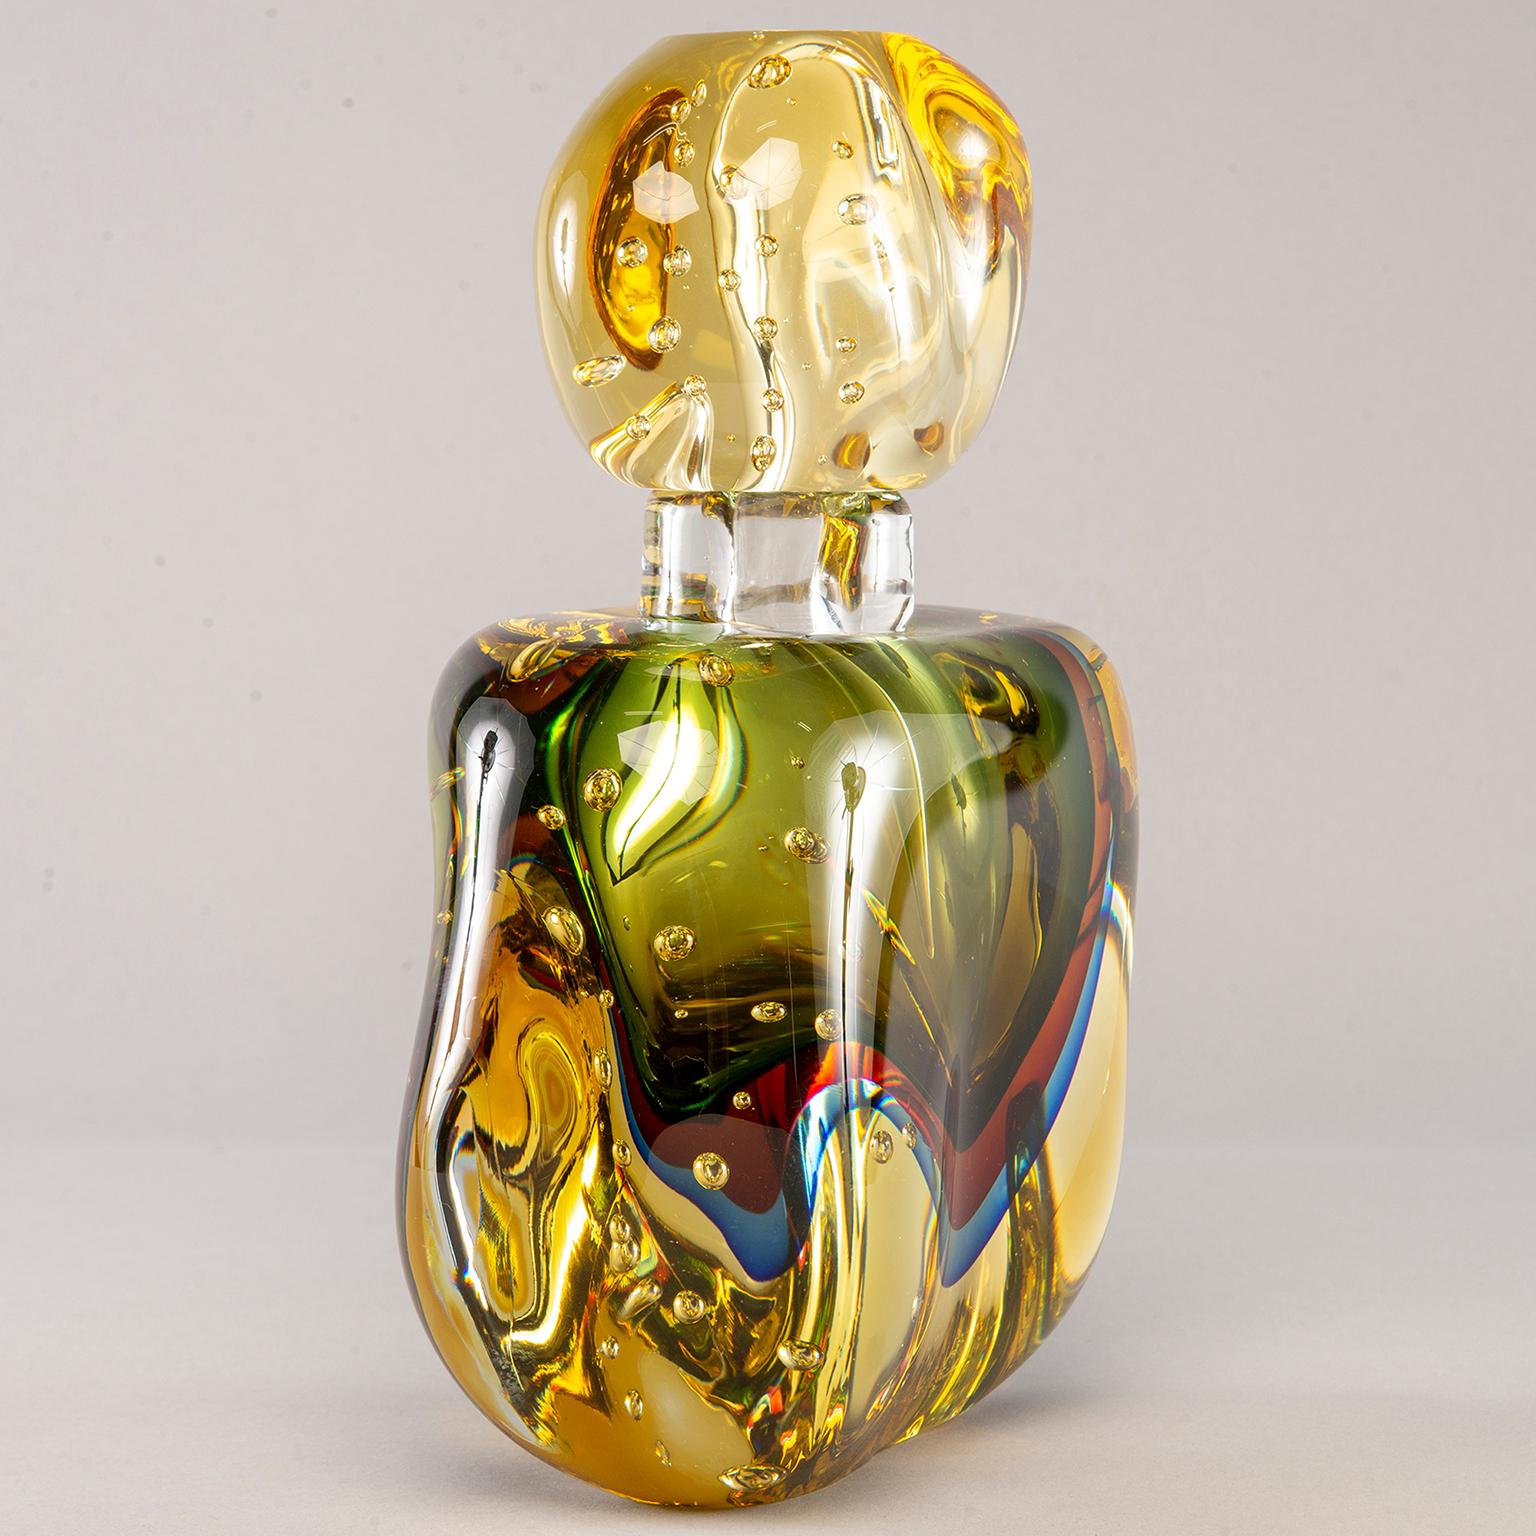 New handmade oversized Murano glass perfume bottle. Thick amber colored glass with Sommerso style layers of magenta, blue and green glass. Large stopper.